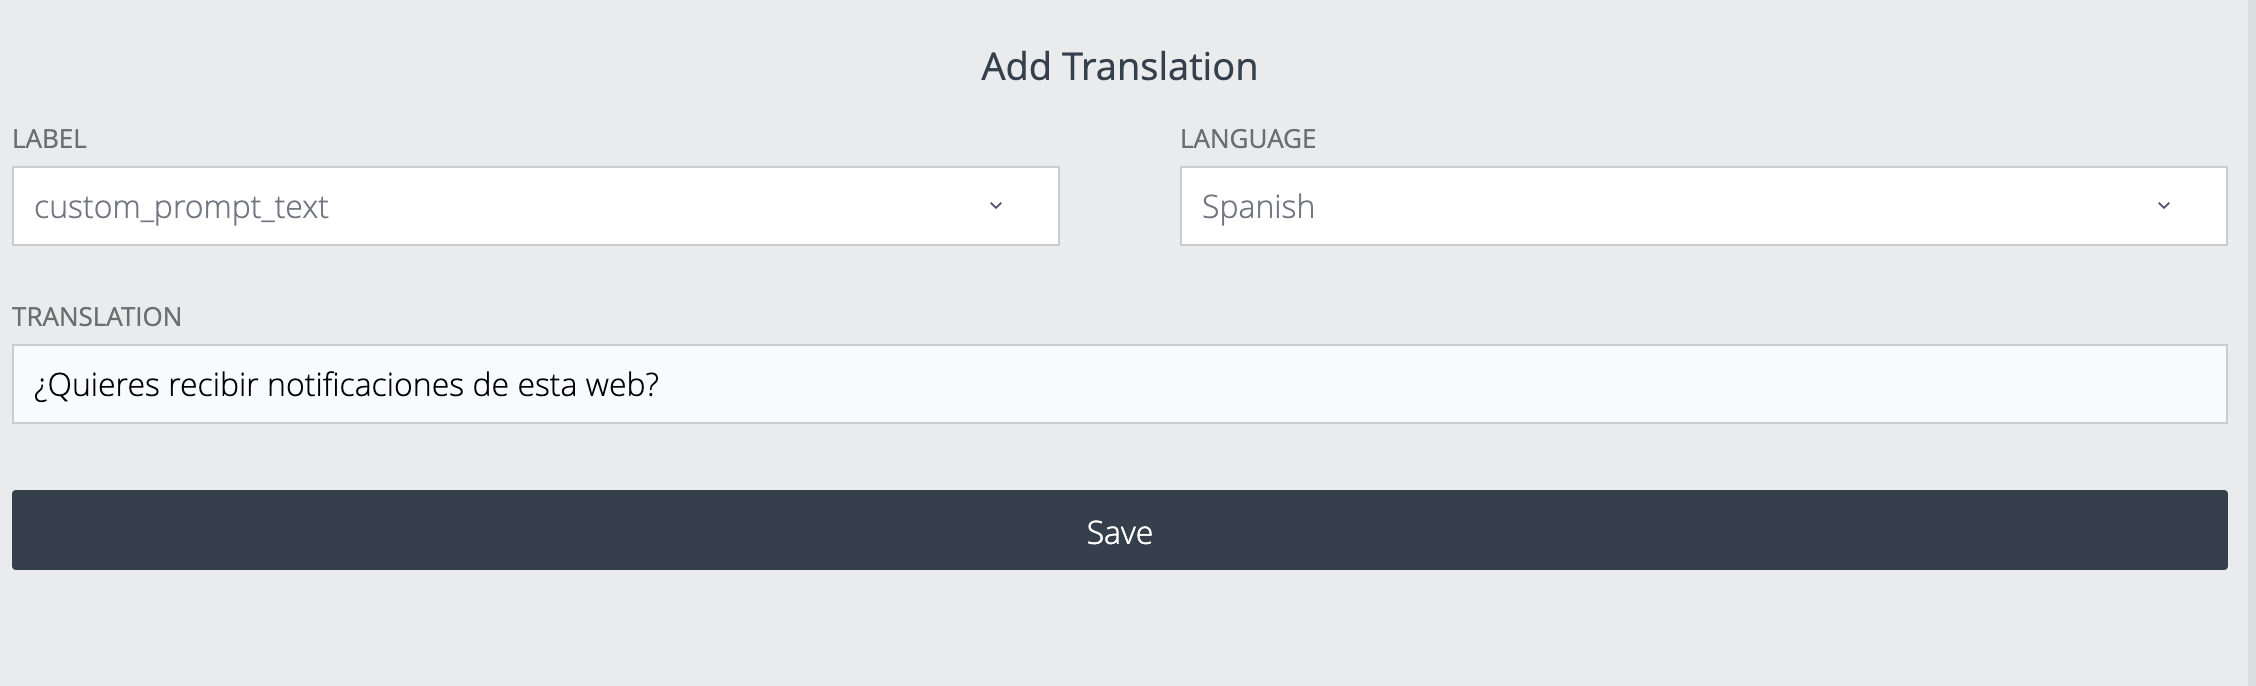 Example of a Spanish translation for the text for custom opt-in prompt.